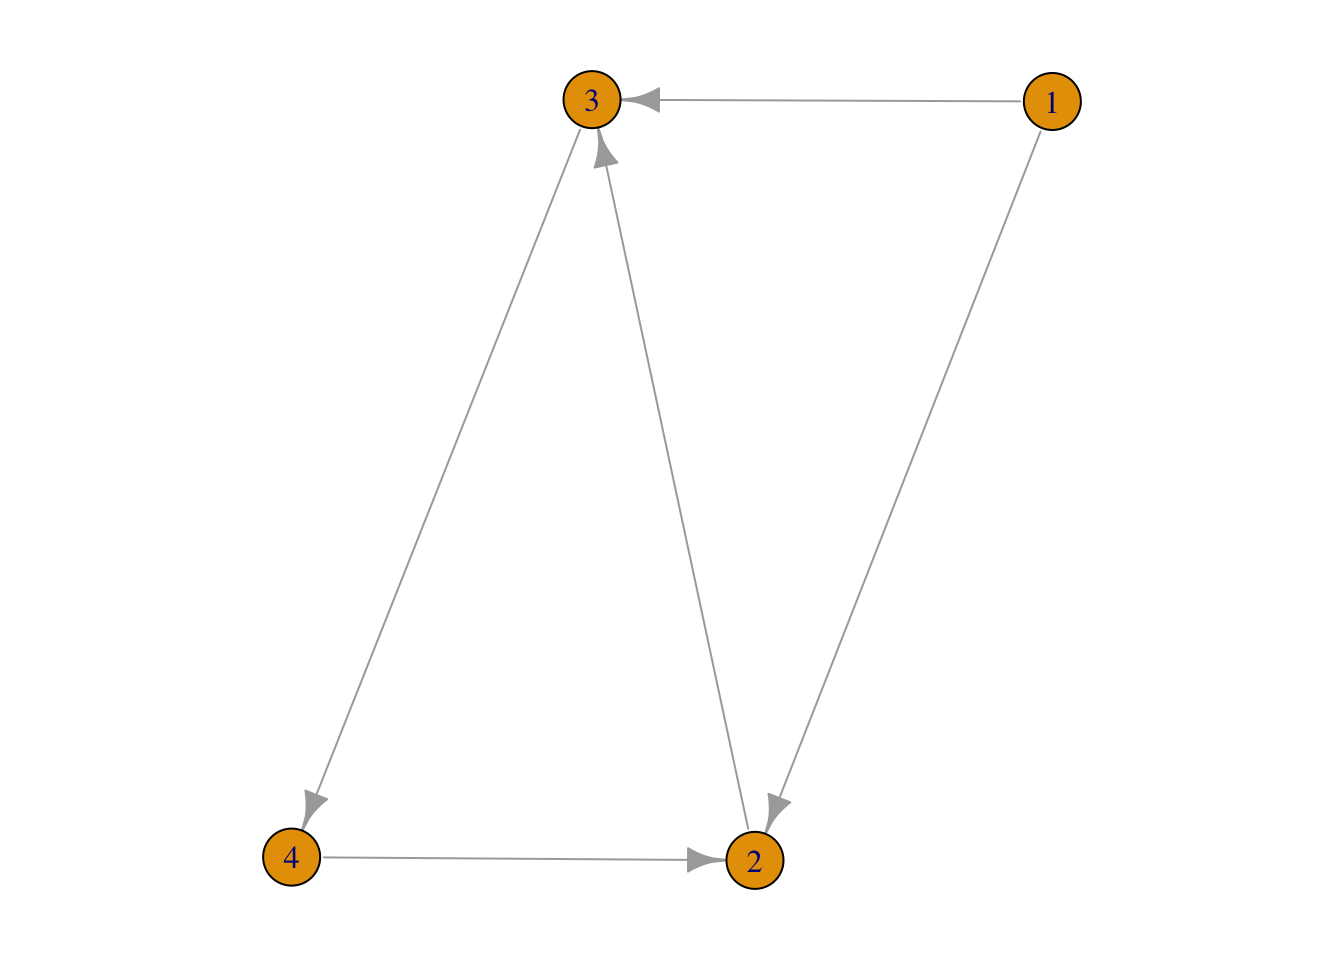 shortest paths in a directed network